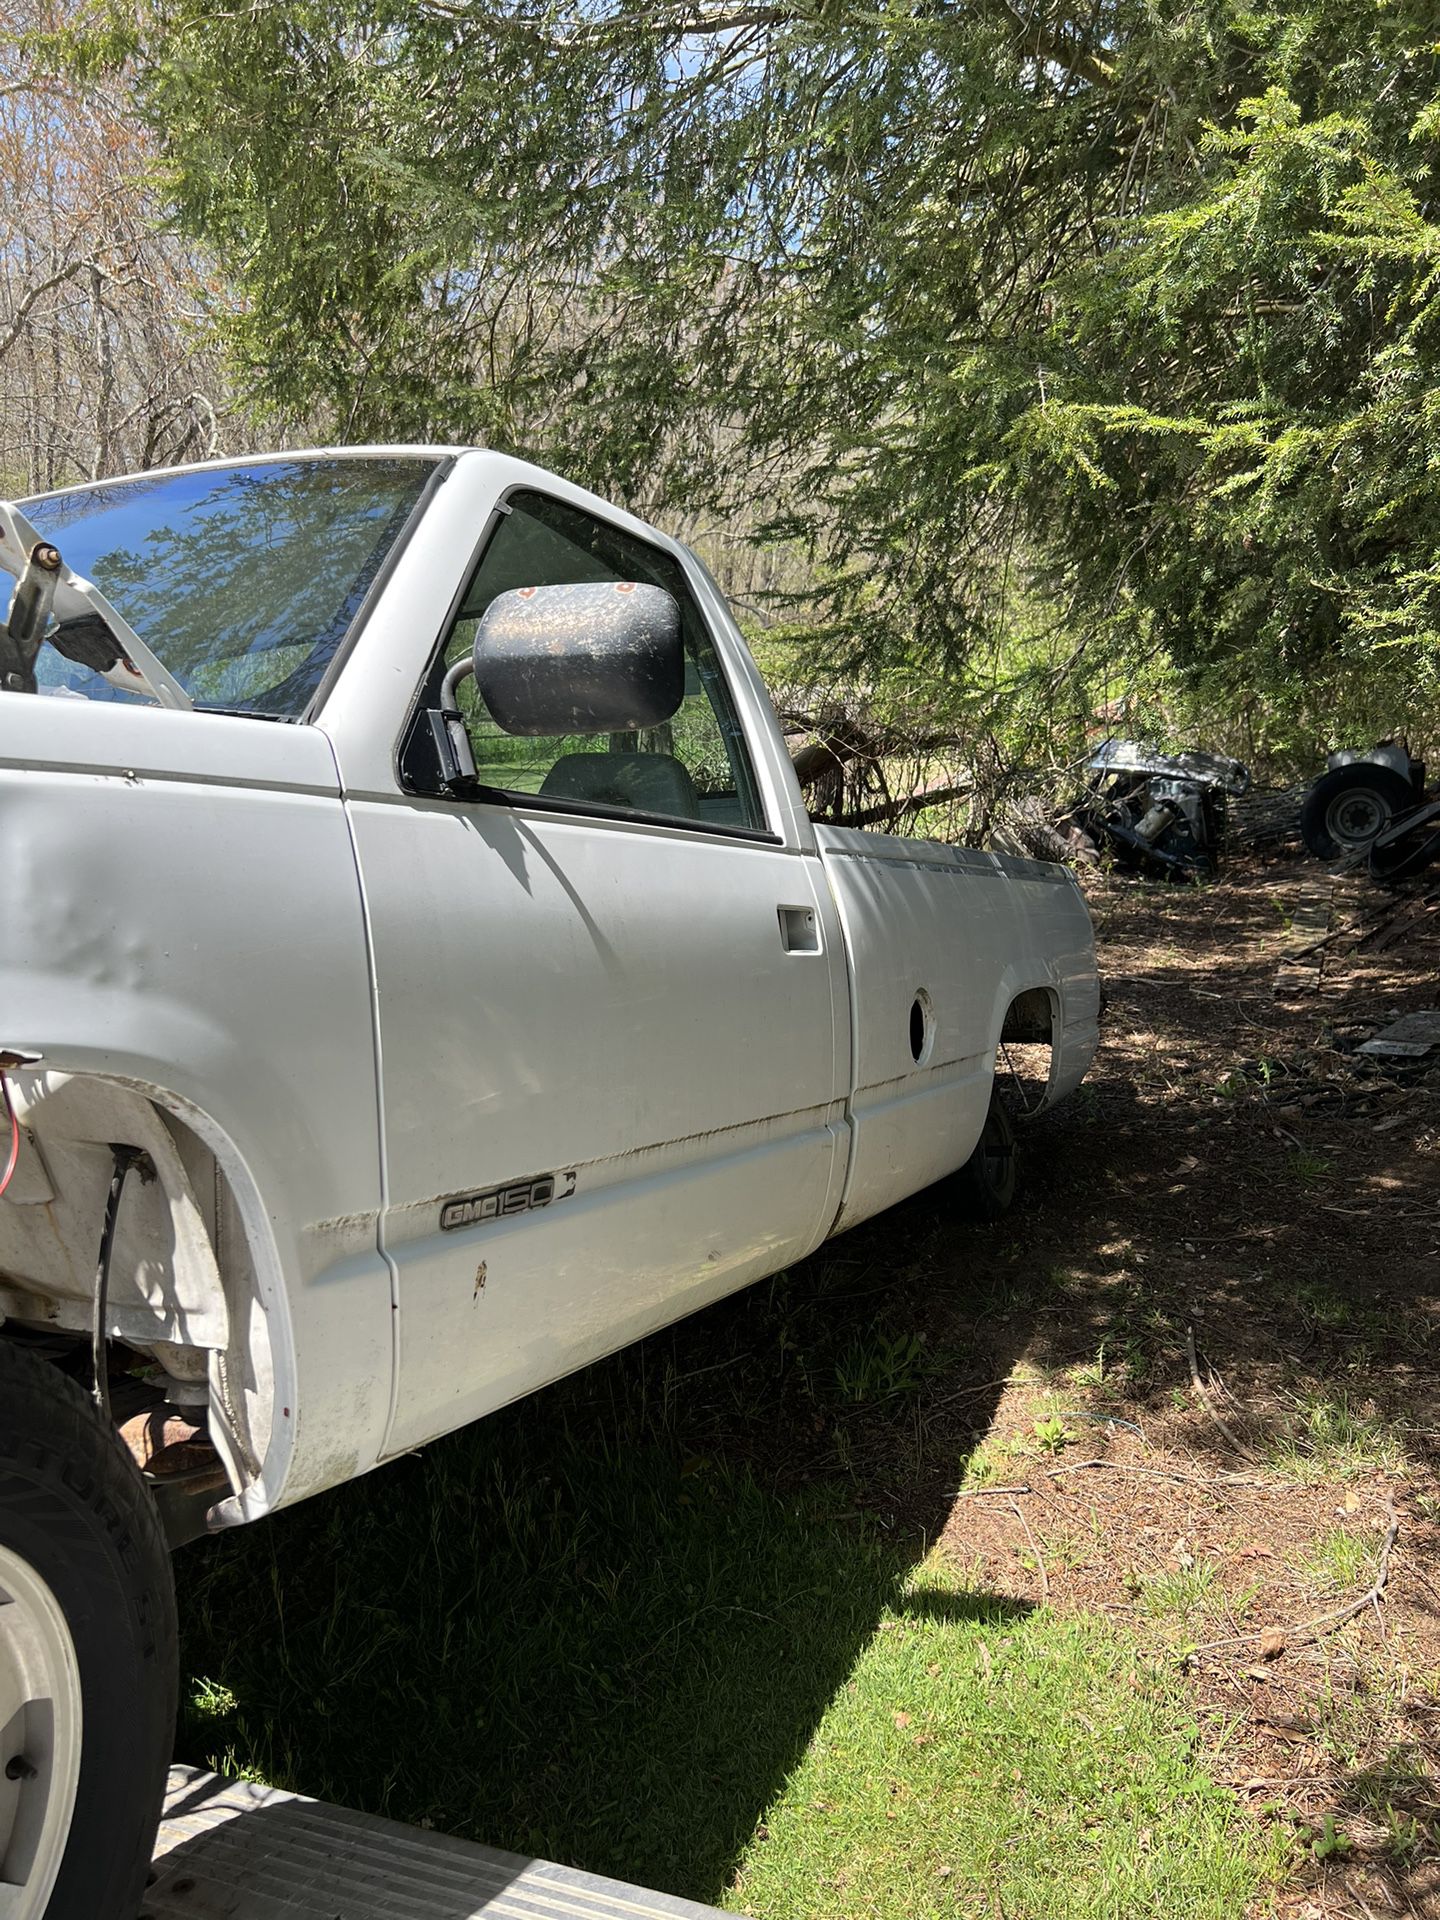 1994 Chevy 1500 4wd For Parts Or Buy Entire Truck